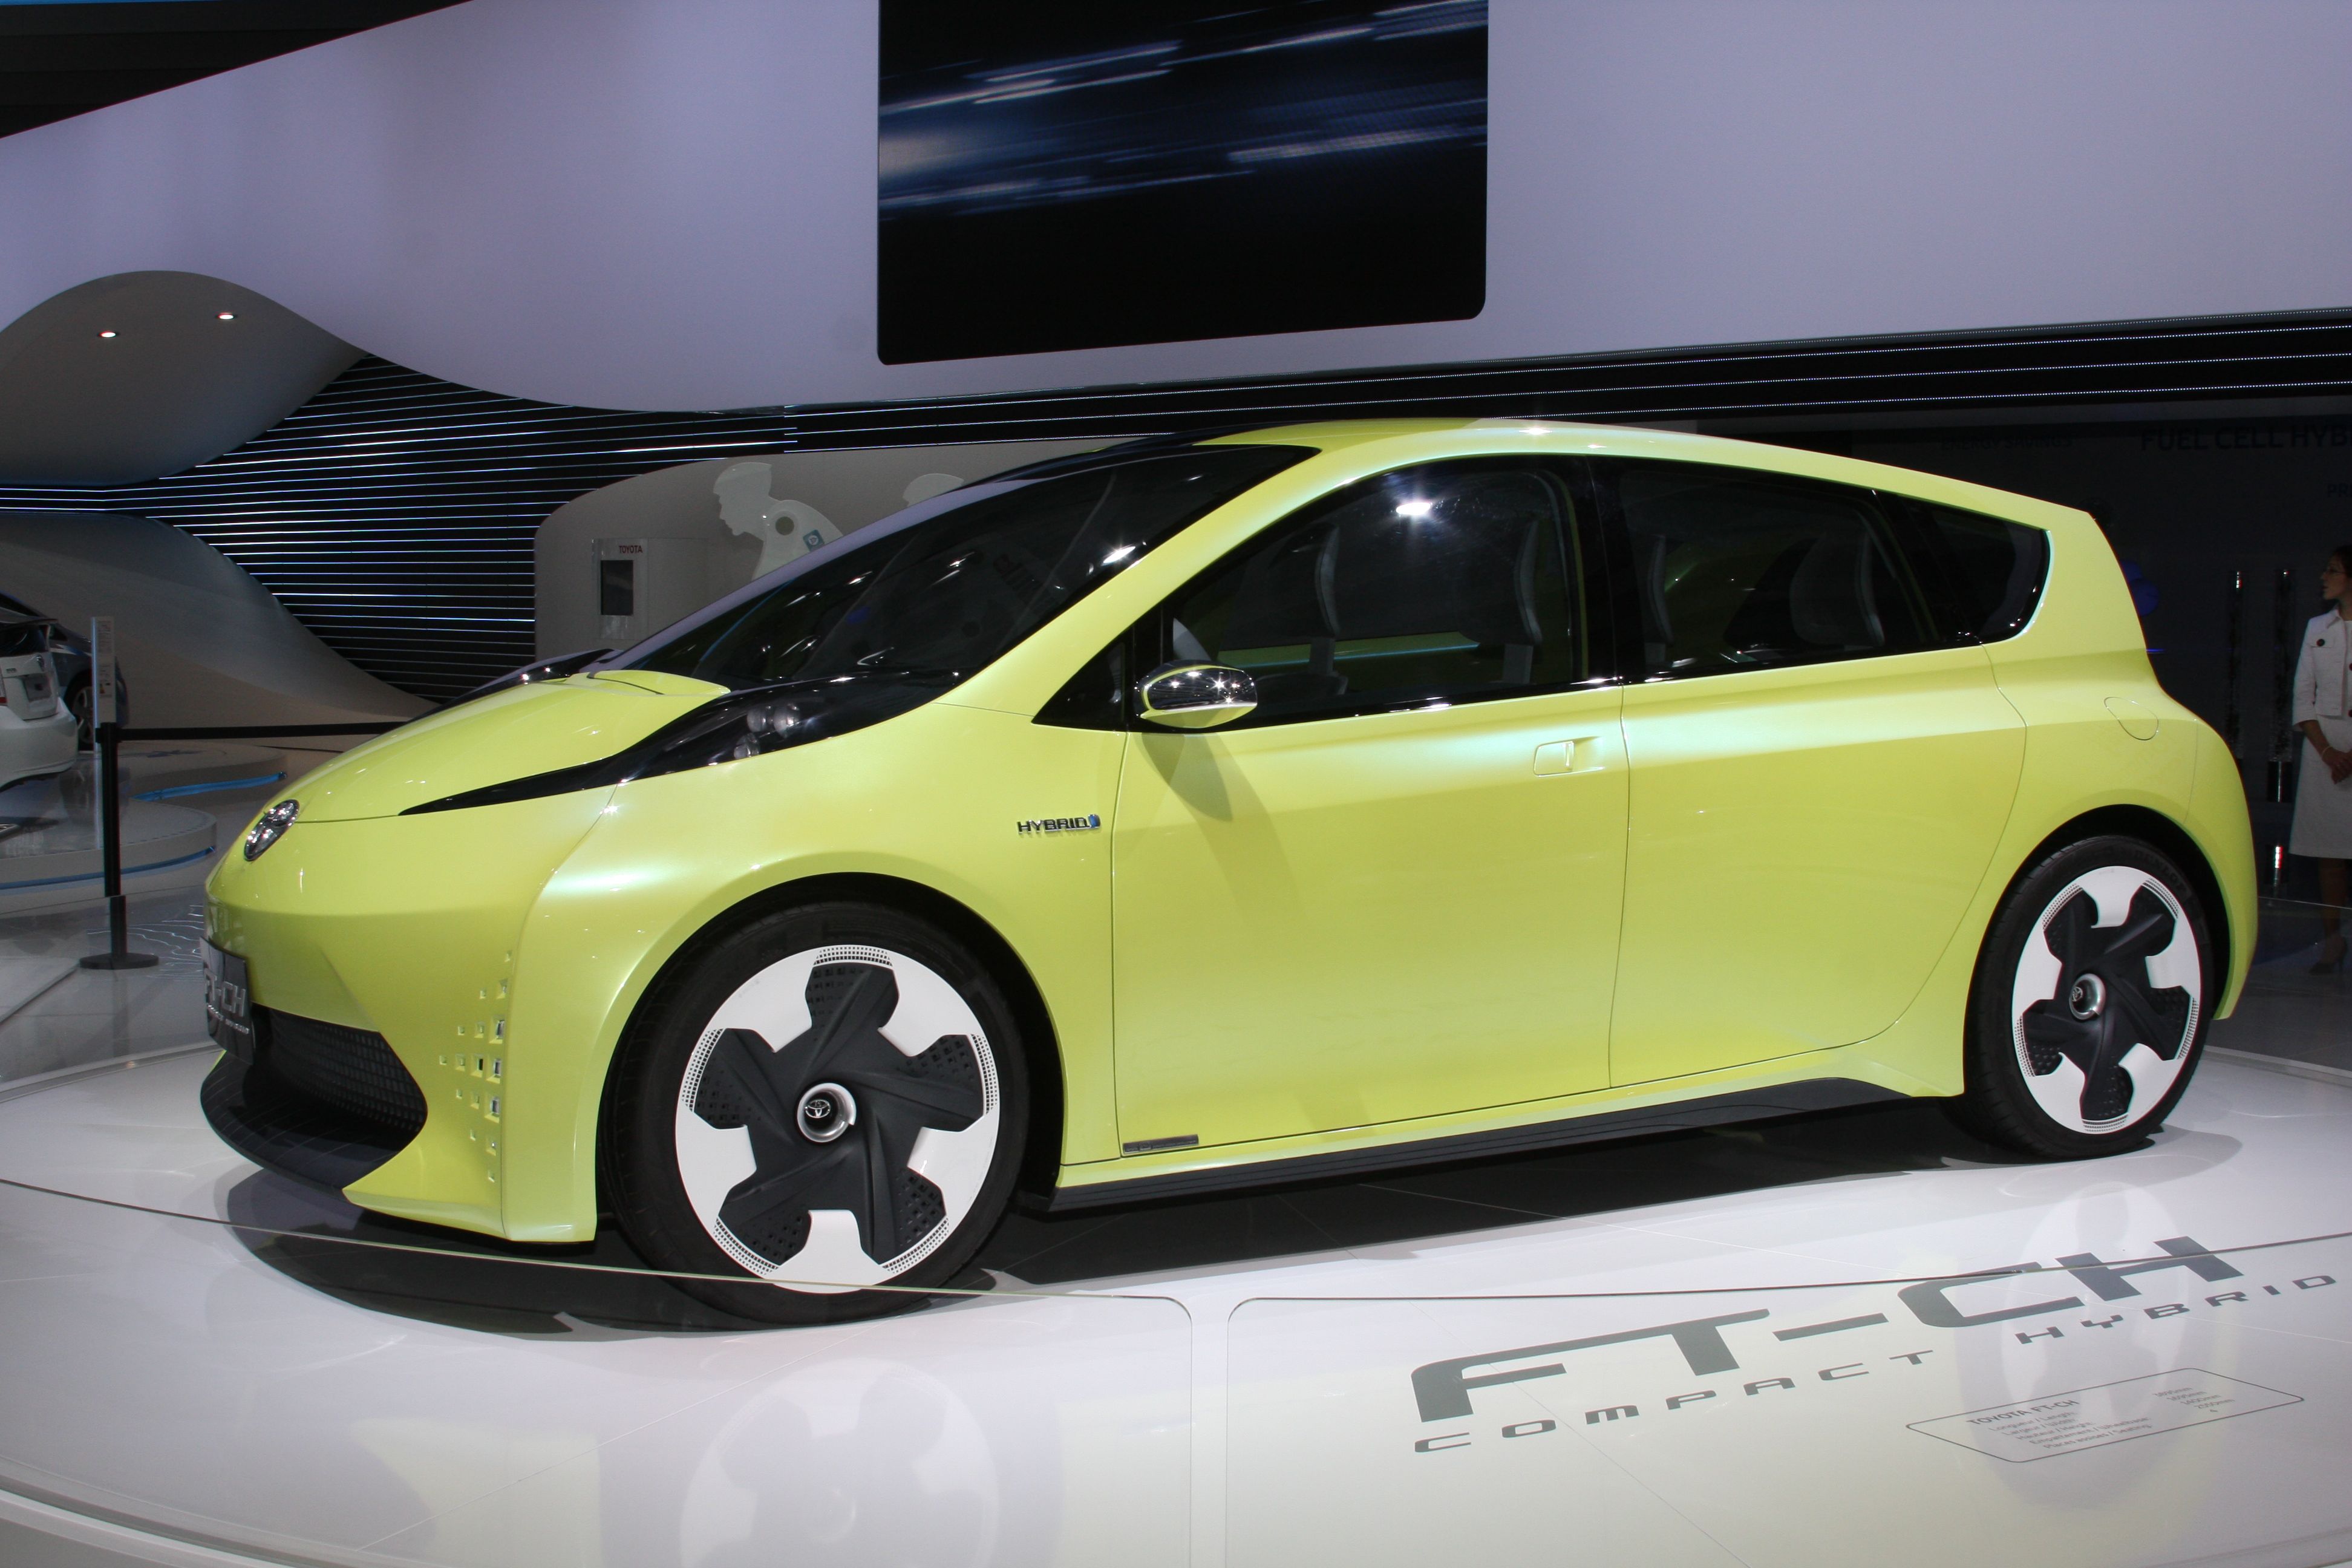 First European showing for the FT-CH compact hybrid concept